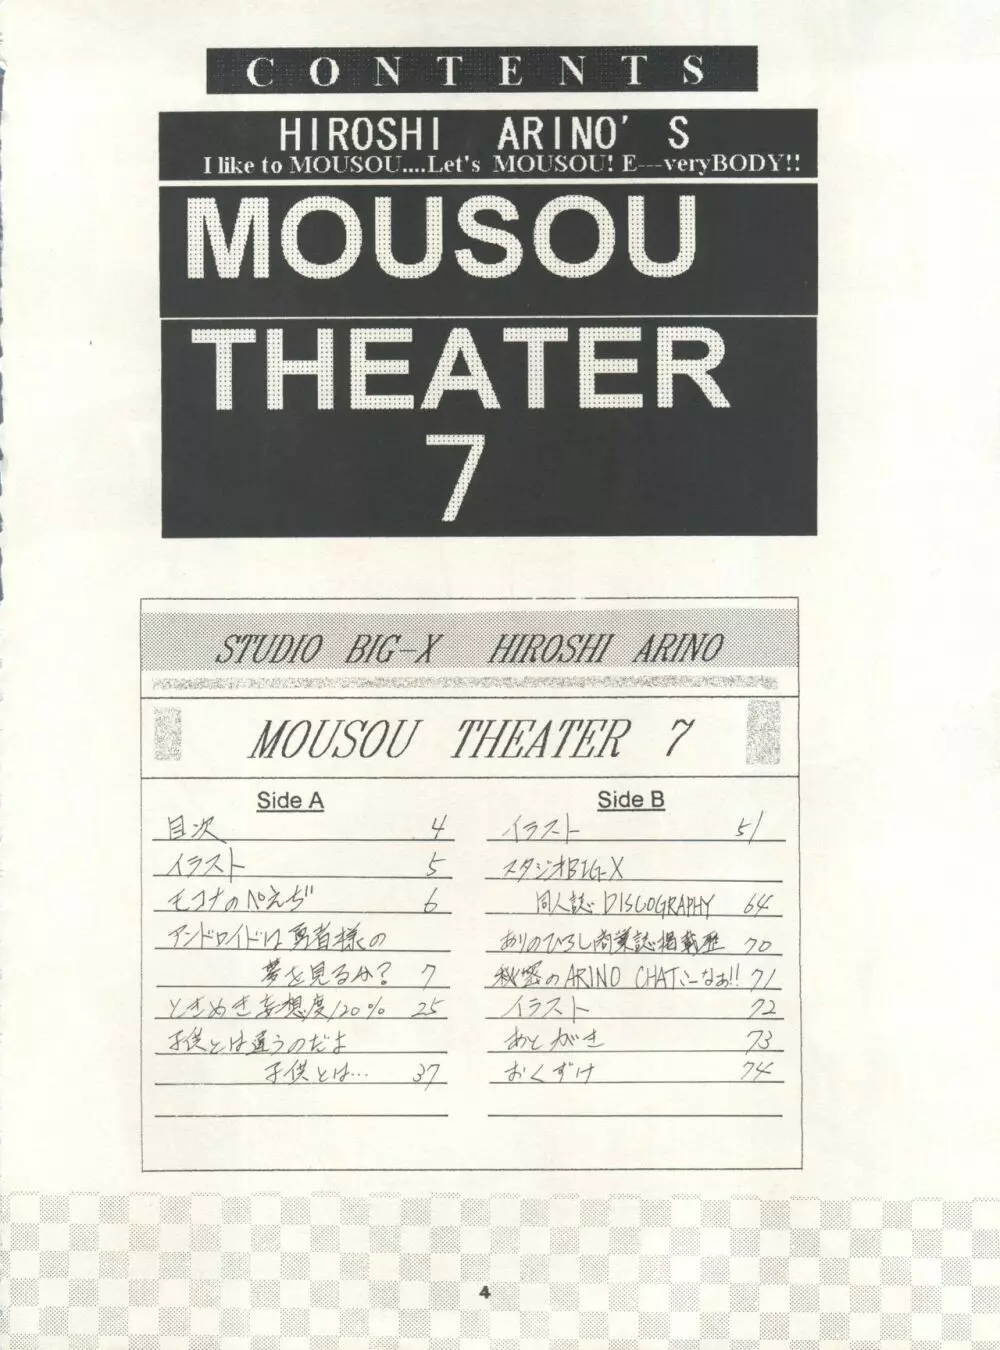 MOUSOU THEATER 7 4ページ